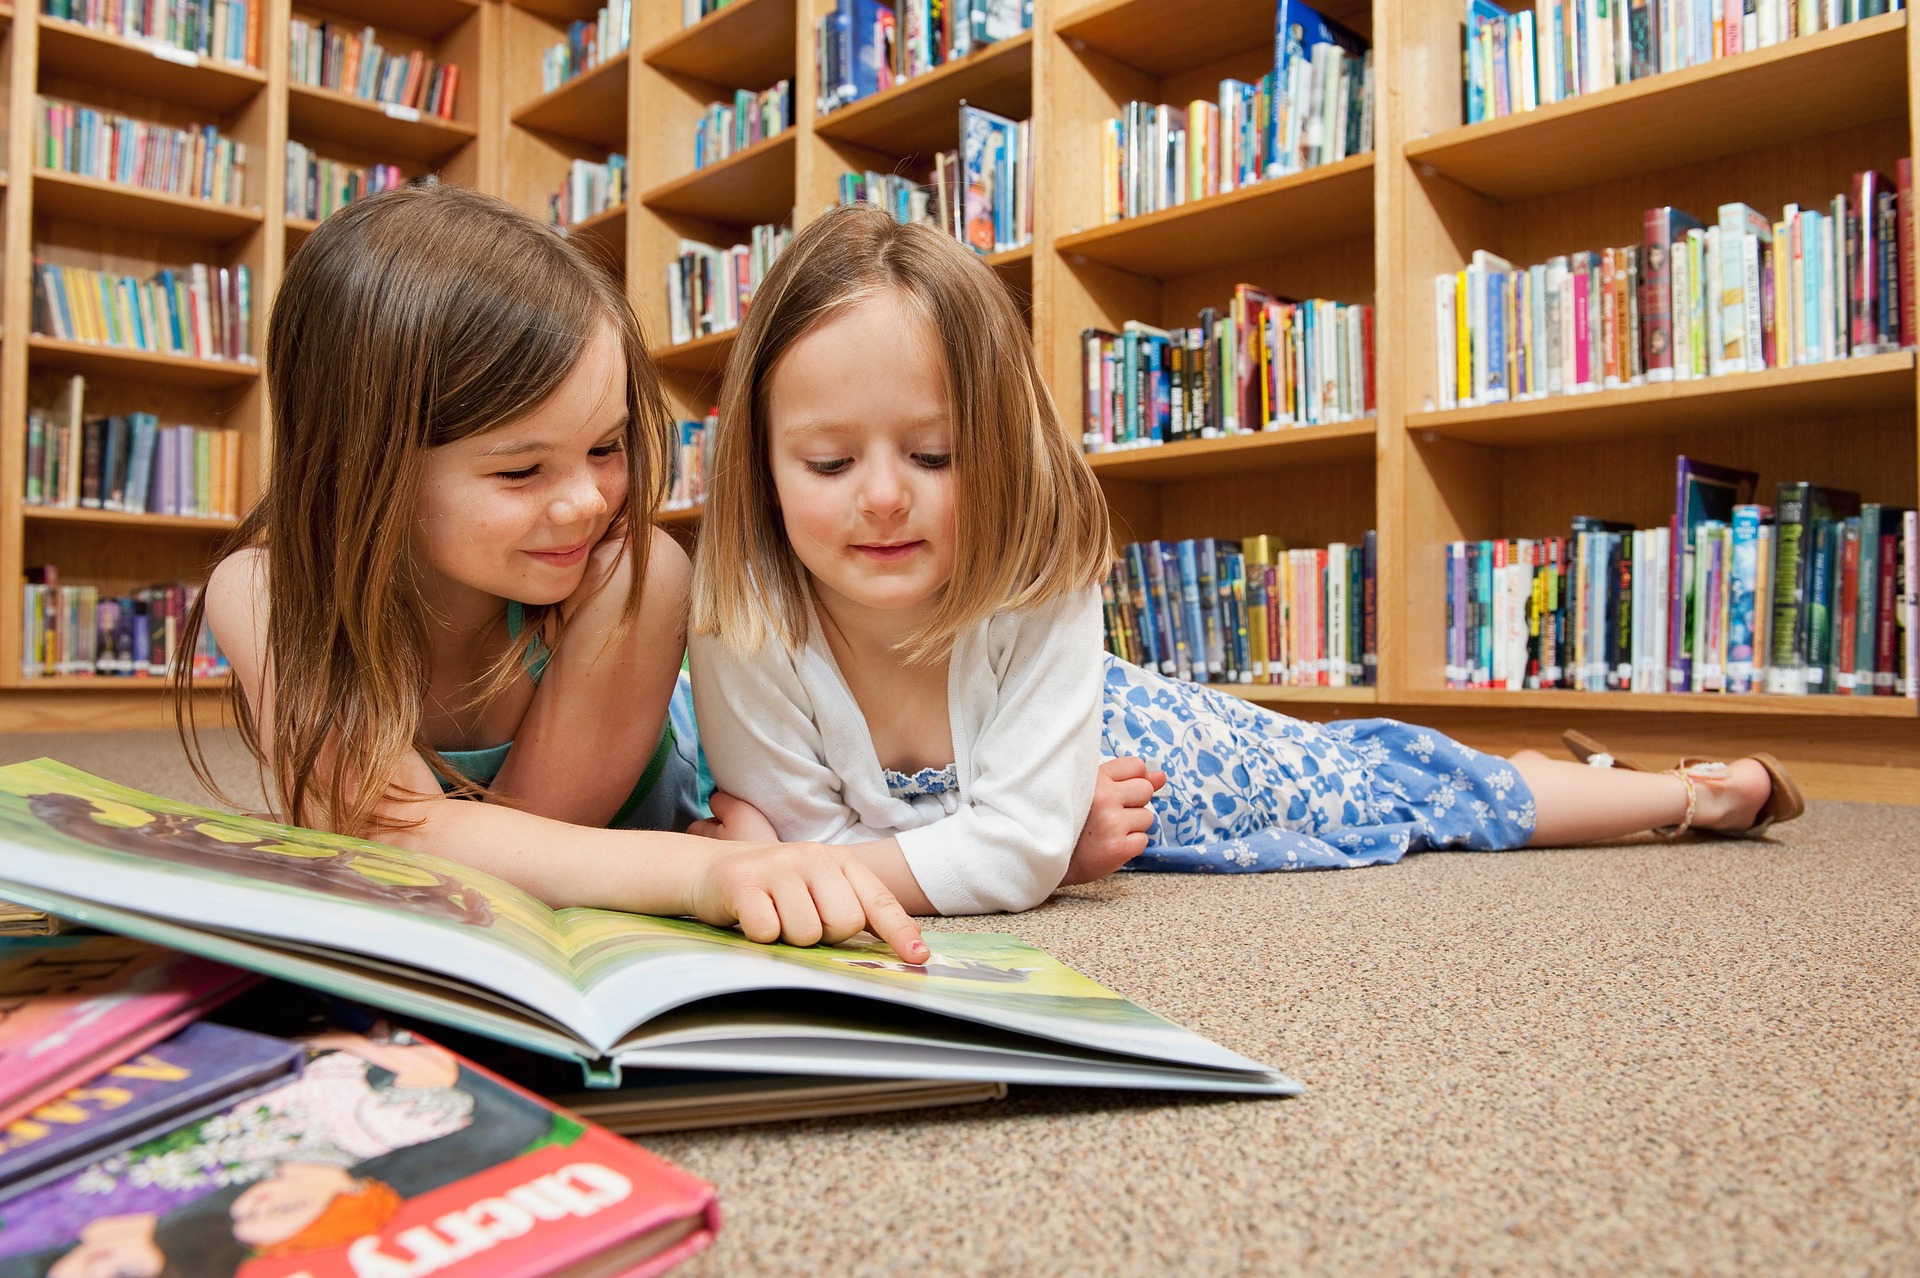 Two female children reading books in a library setting